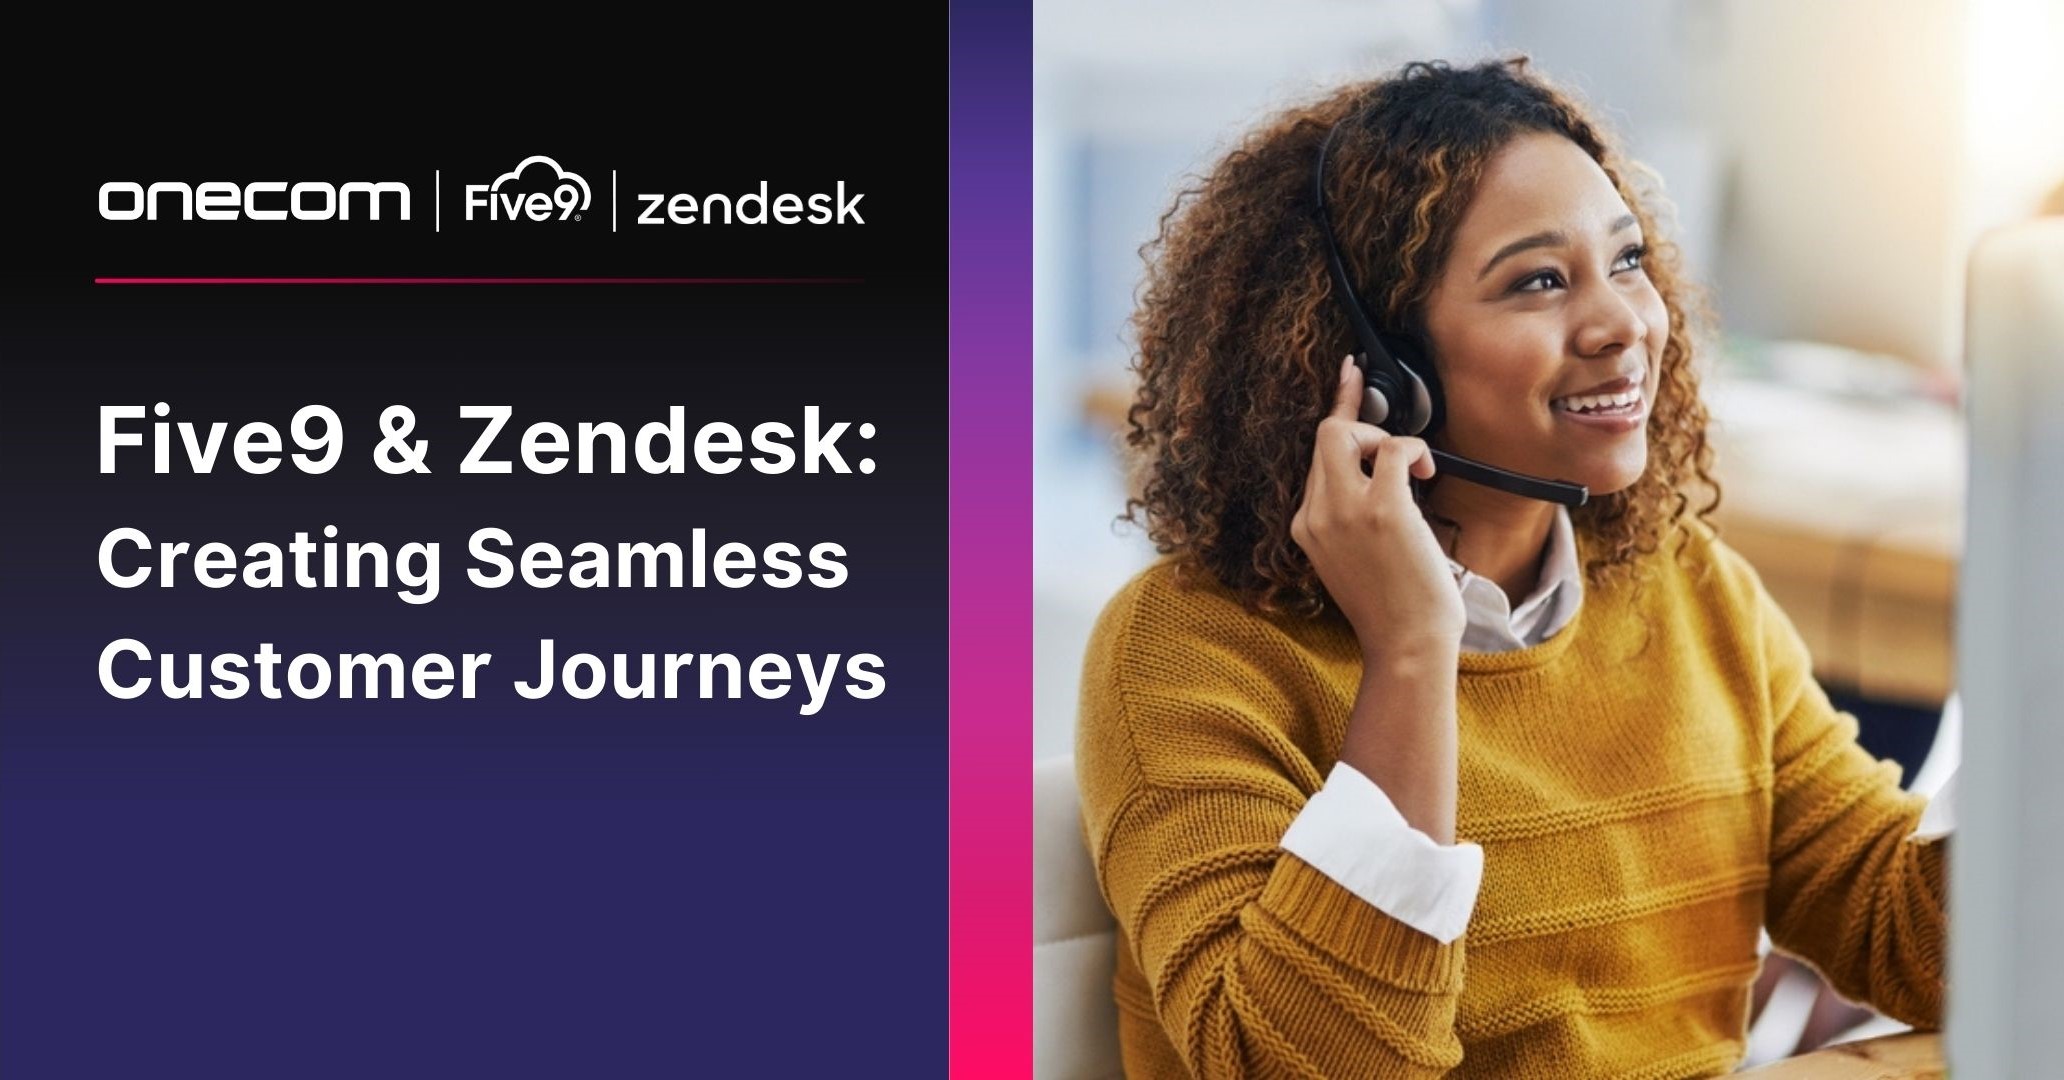 How Five9 & Zendesk Connect Technology, Teams and Customers to Create Seamless Customer Journeys